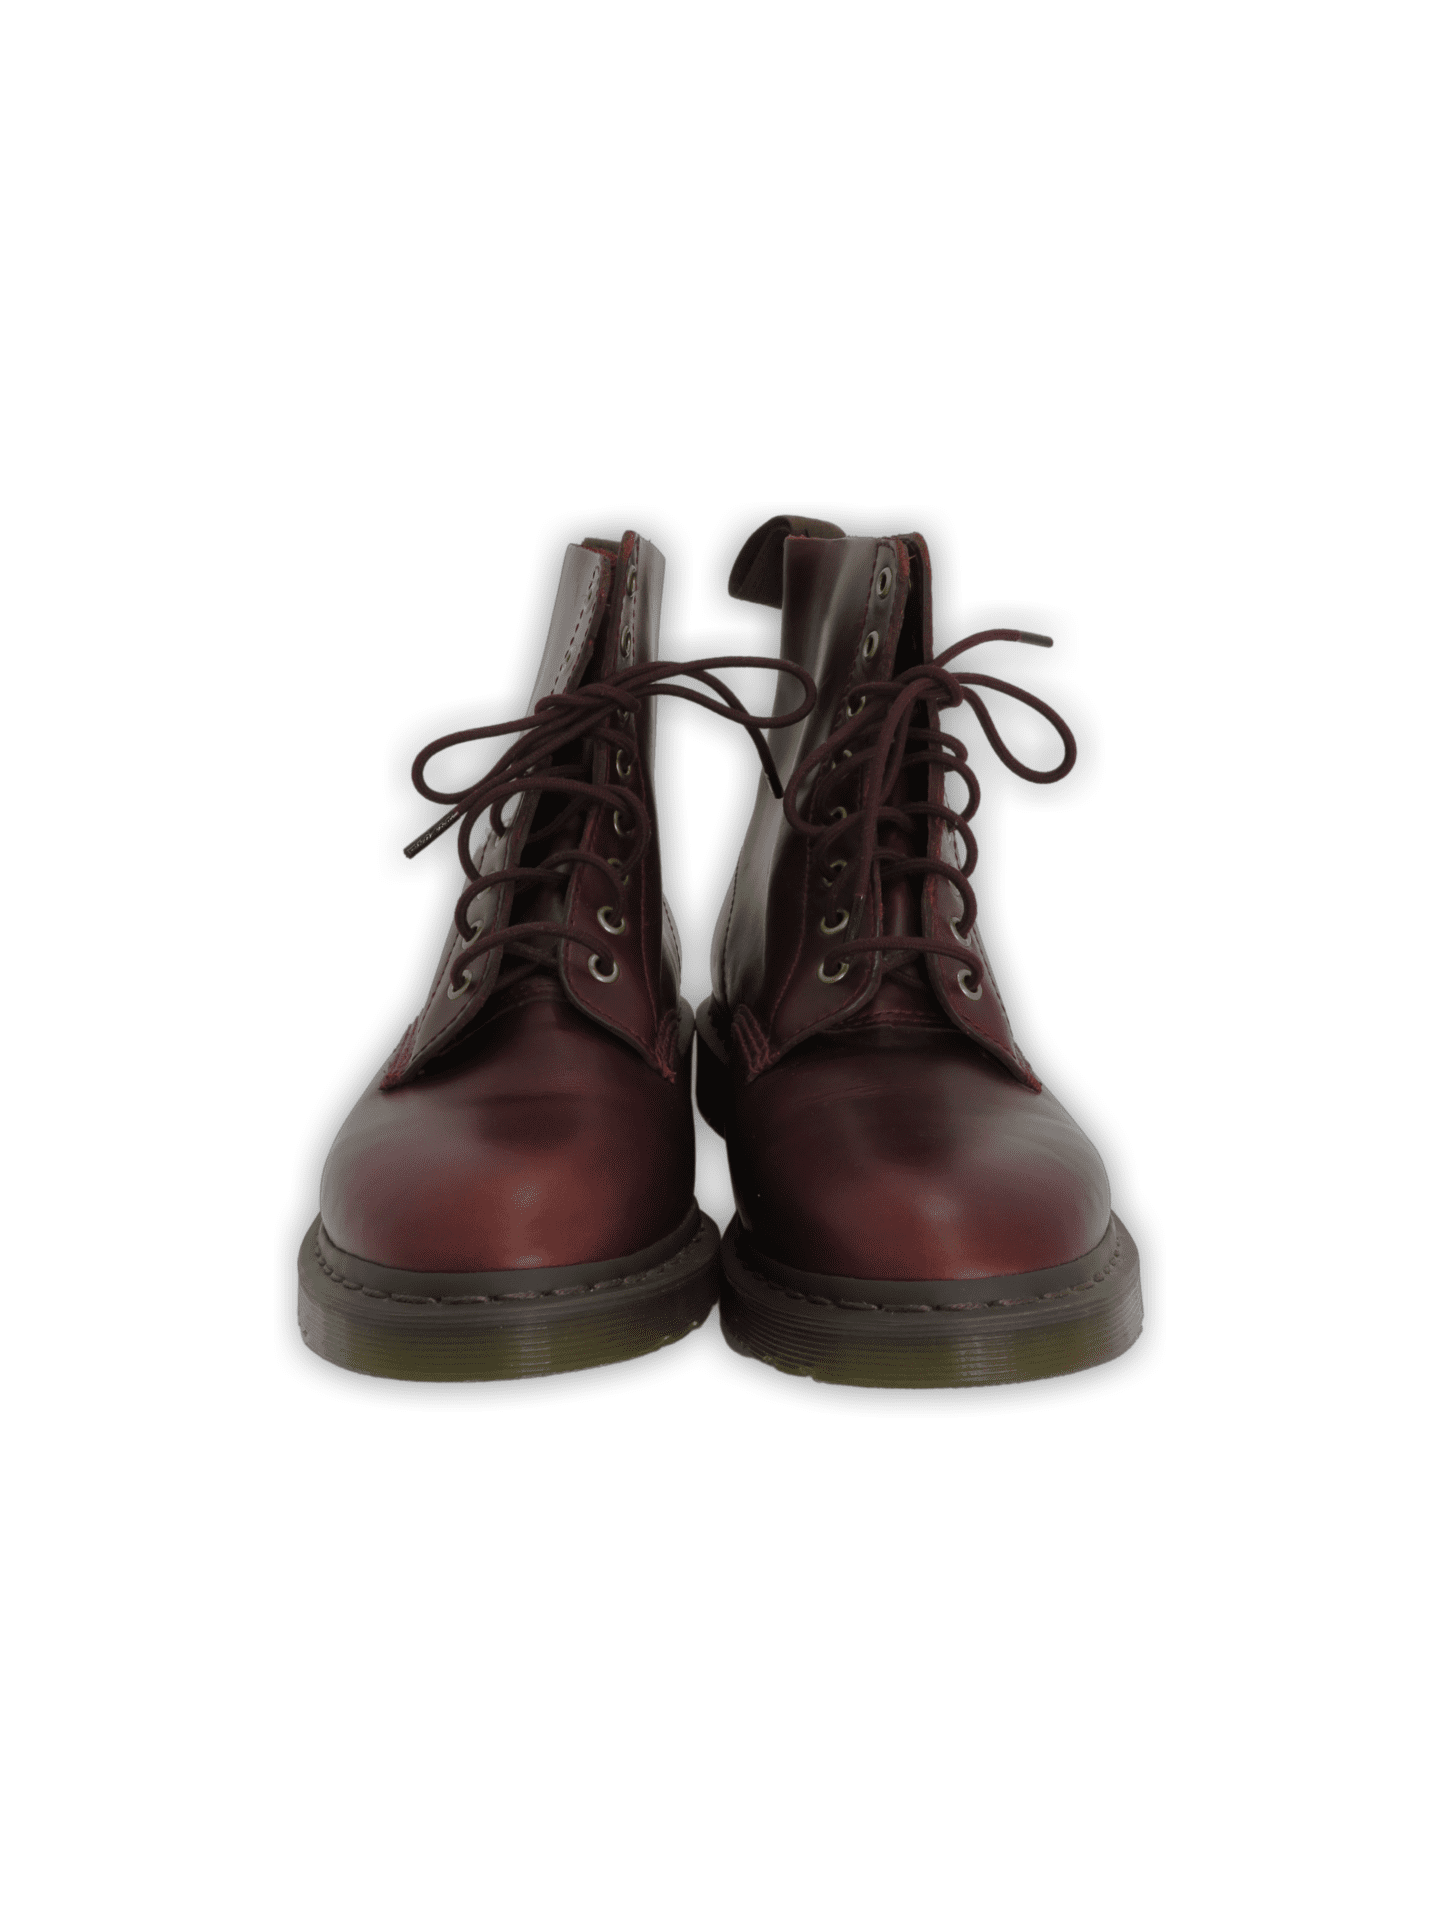 Pair of mens Dr. Martens boots.